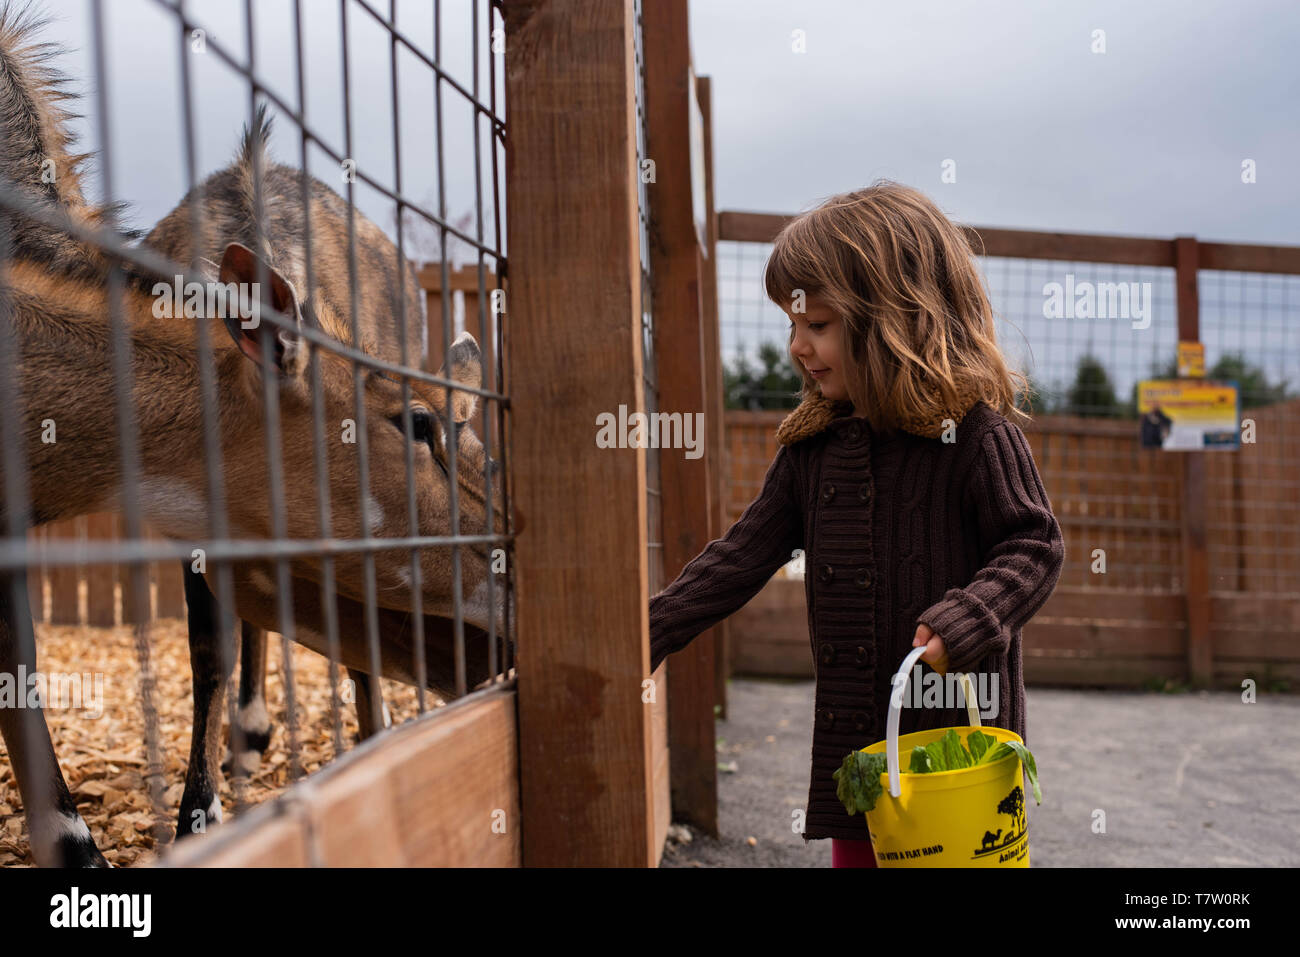 A 4-year old girl feeds deer at a animal park in Harpursville, NY., United States Stock Photo